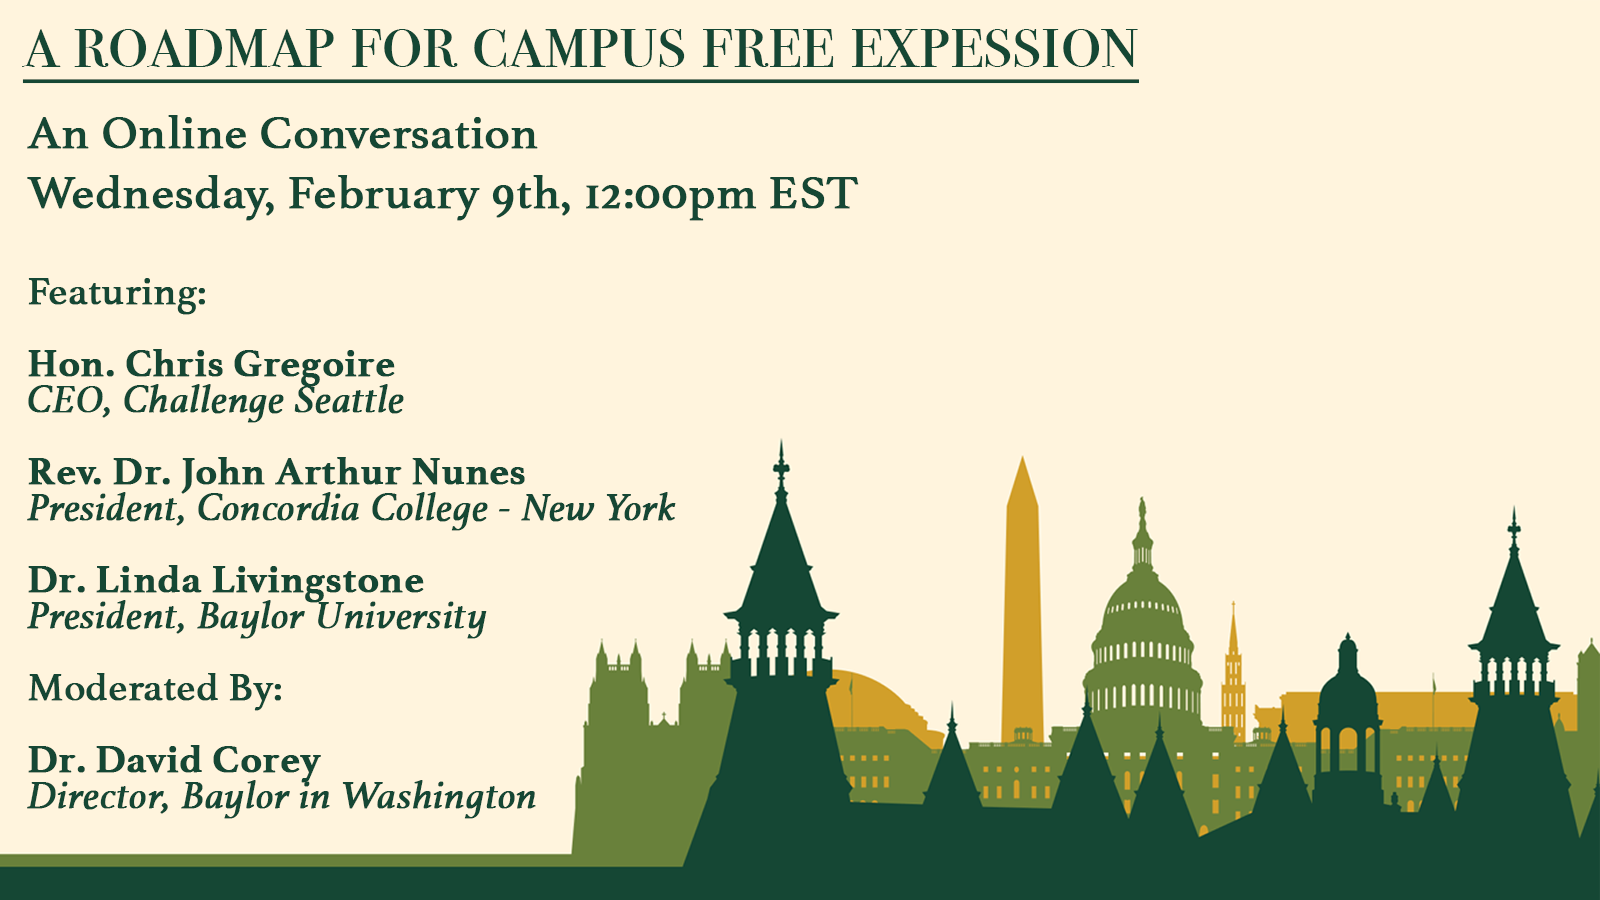 February 9th at Noon EST: A Roadmap for Campus Free Expression